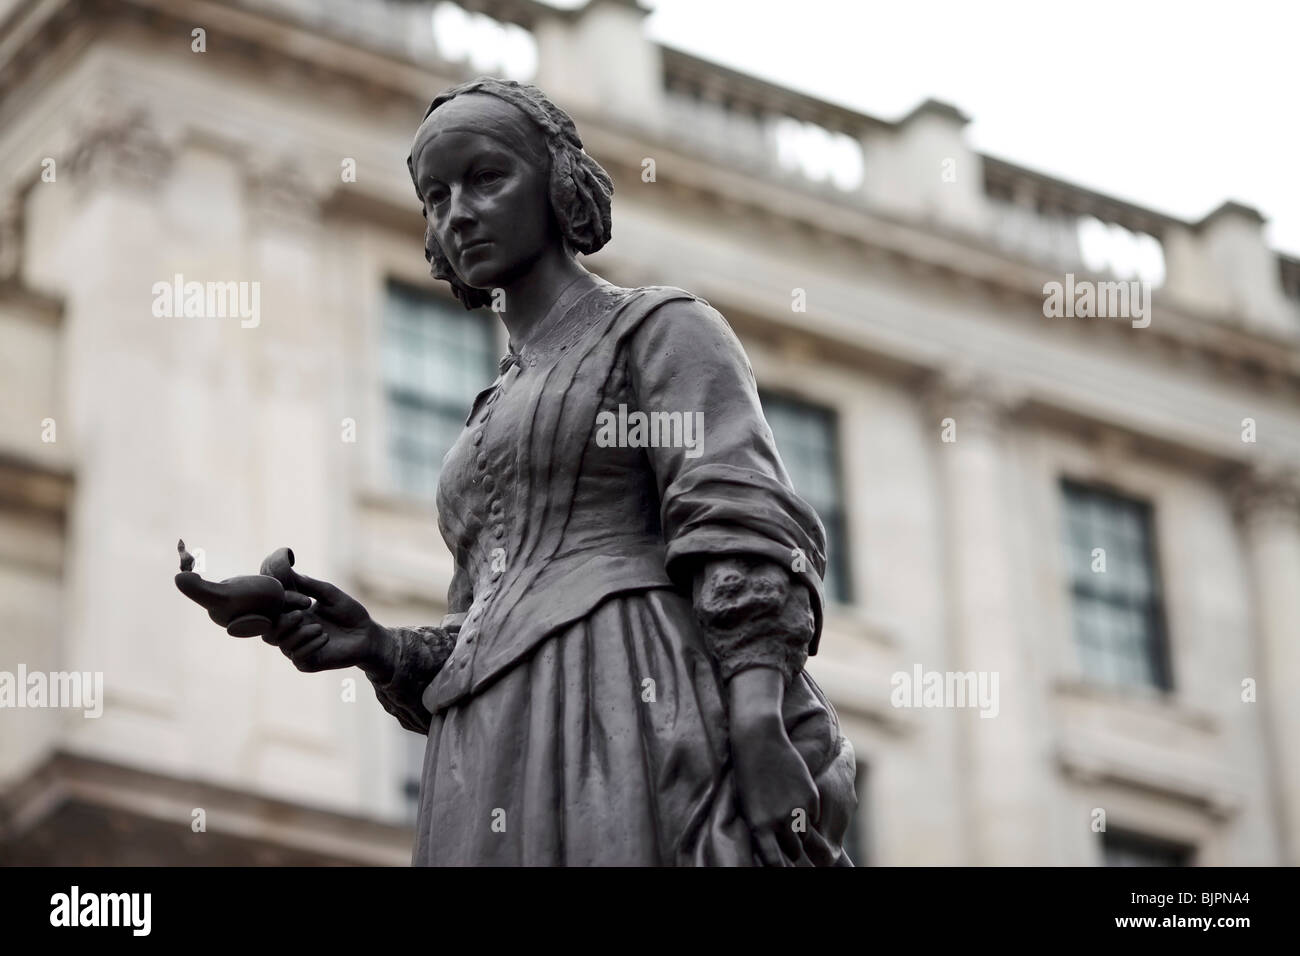 Statue of Florence Nightingale known as the Lady of the Lamp in the Crimean War near the Guards monument in London Stock Photo